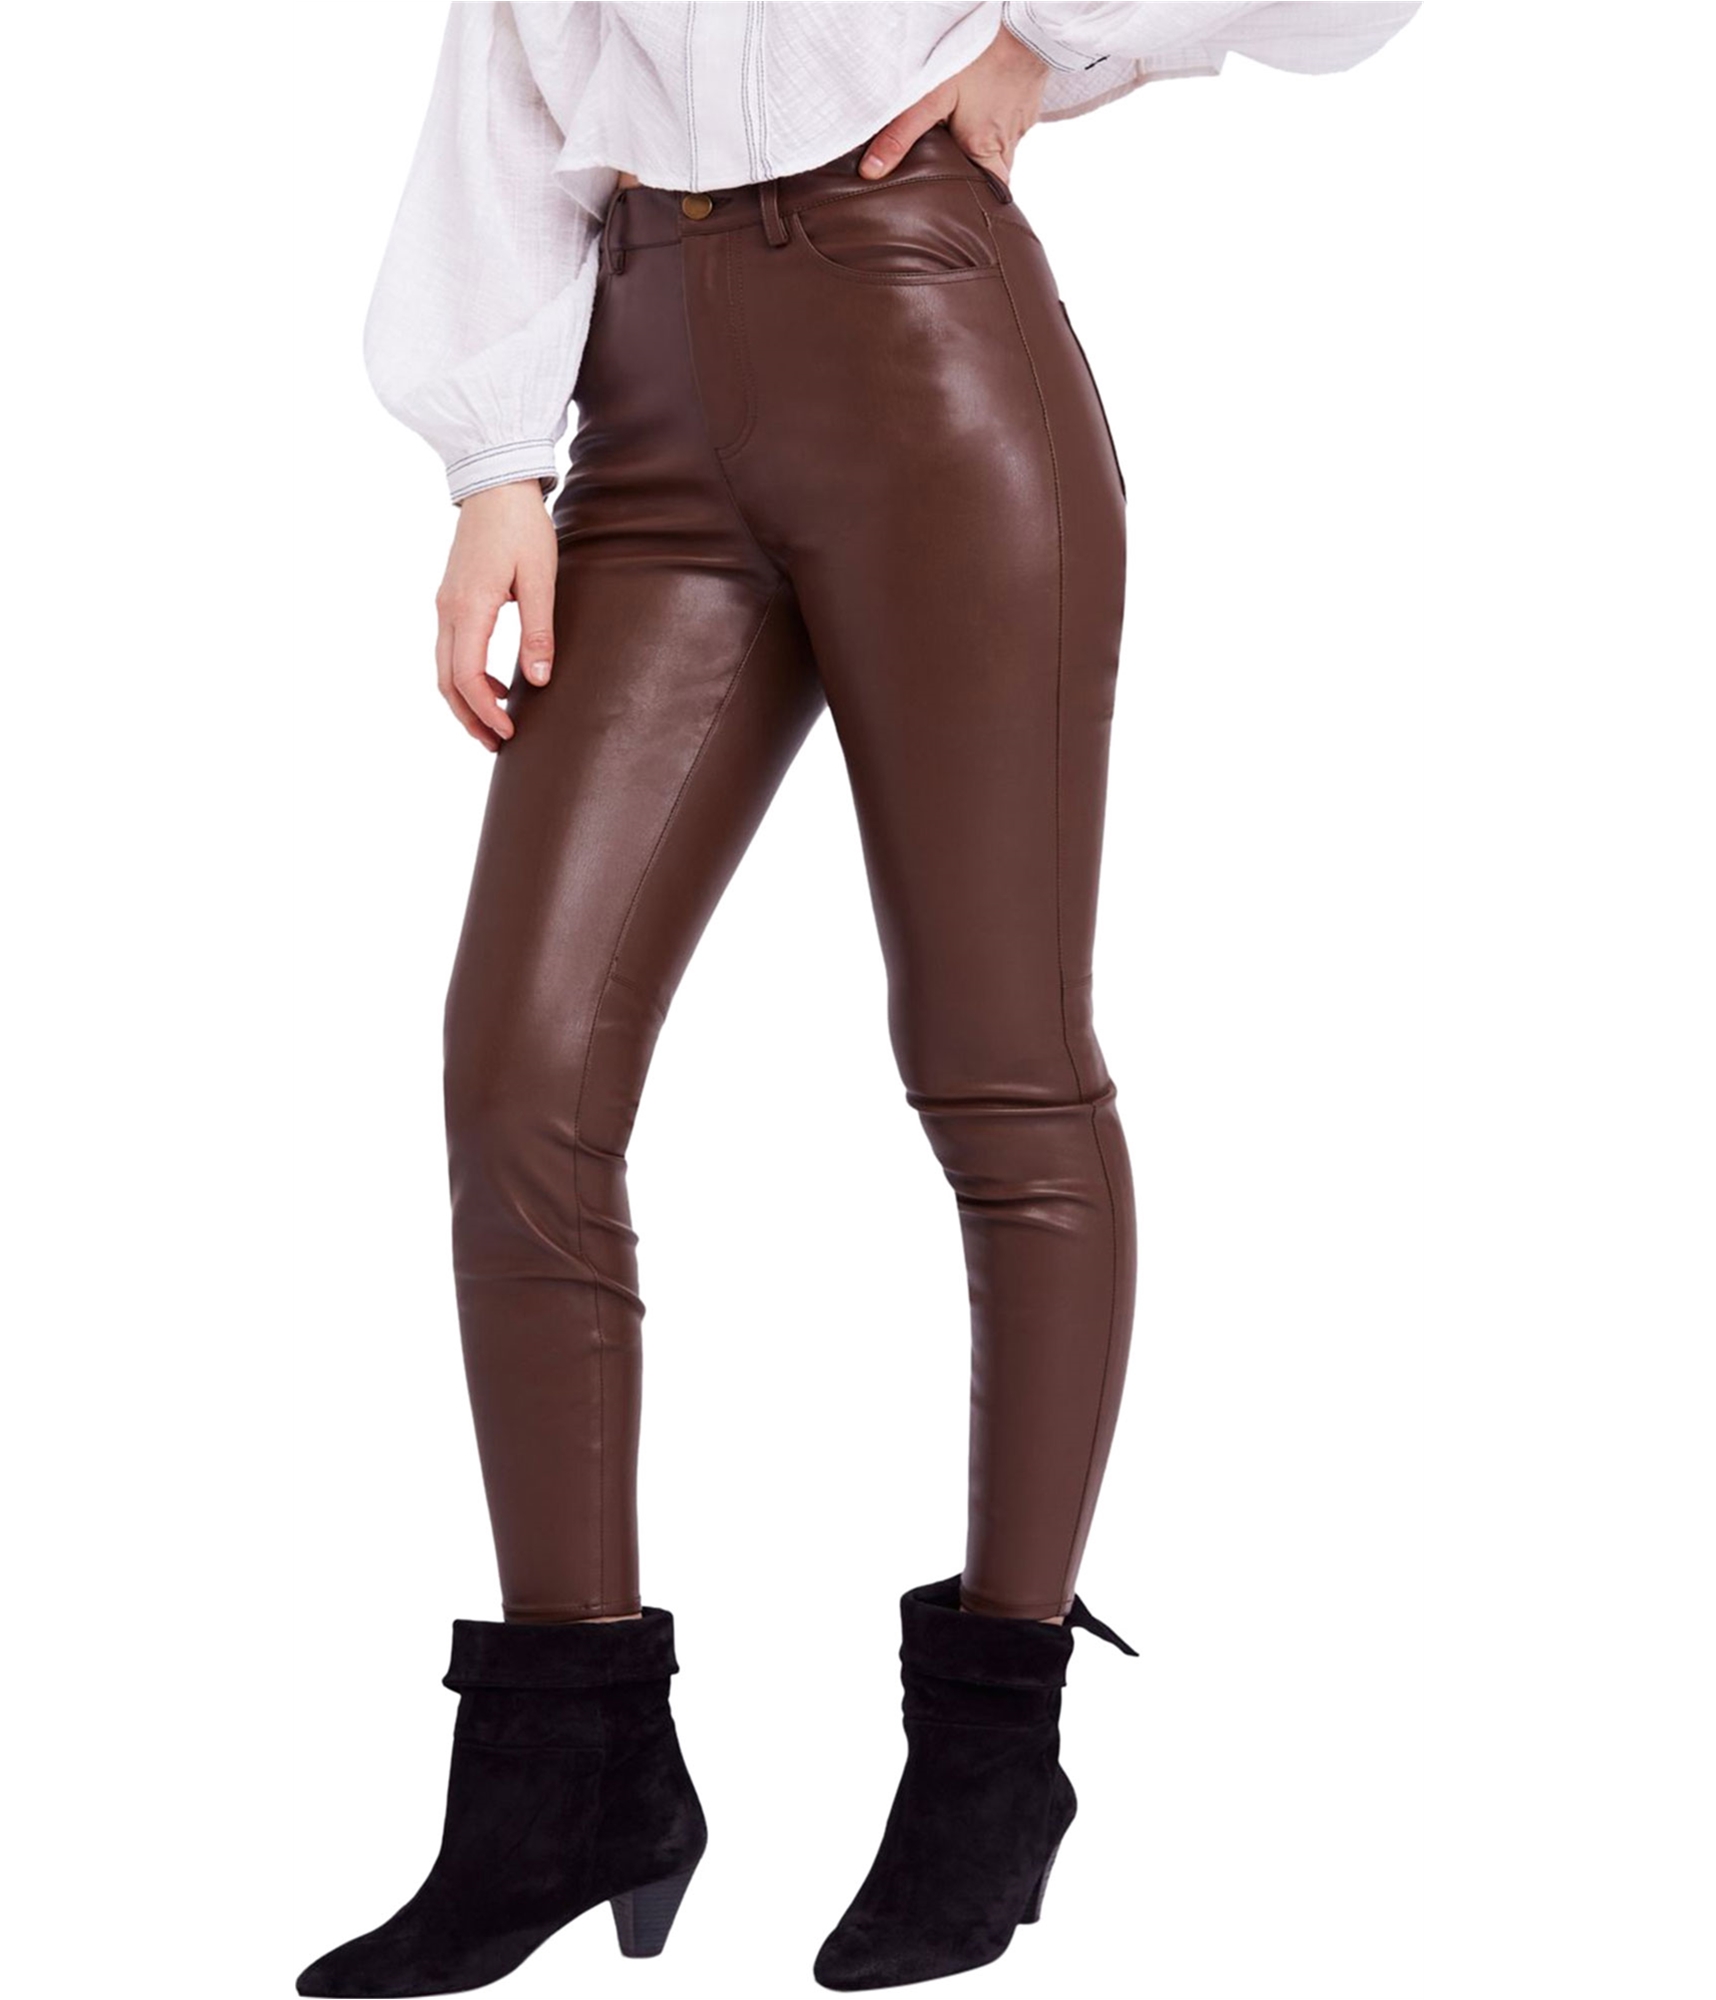 Family Women Tights (Brown)